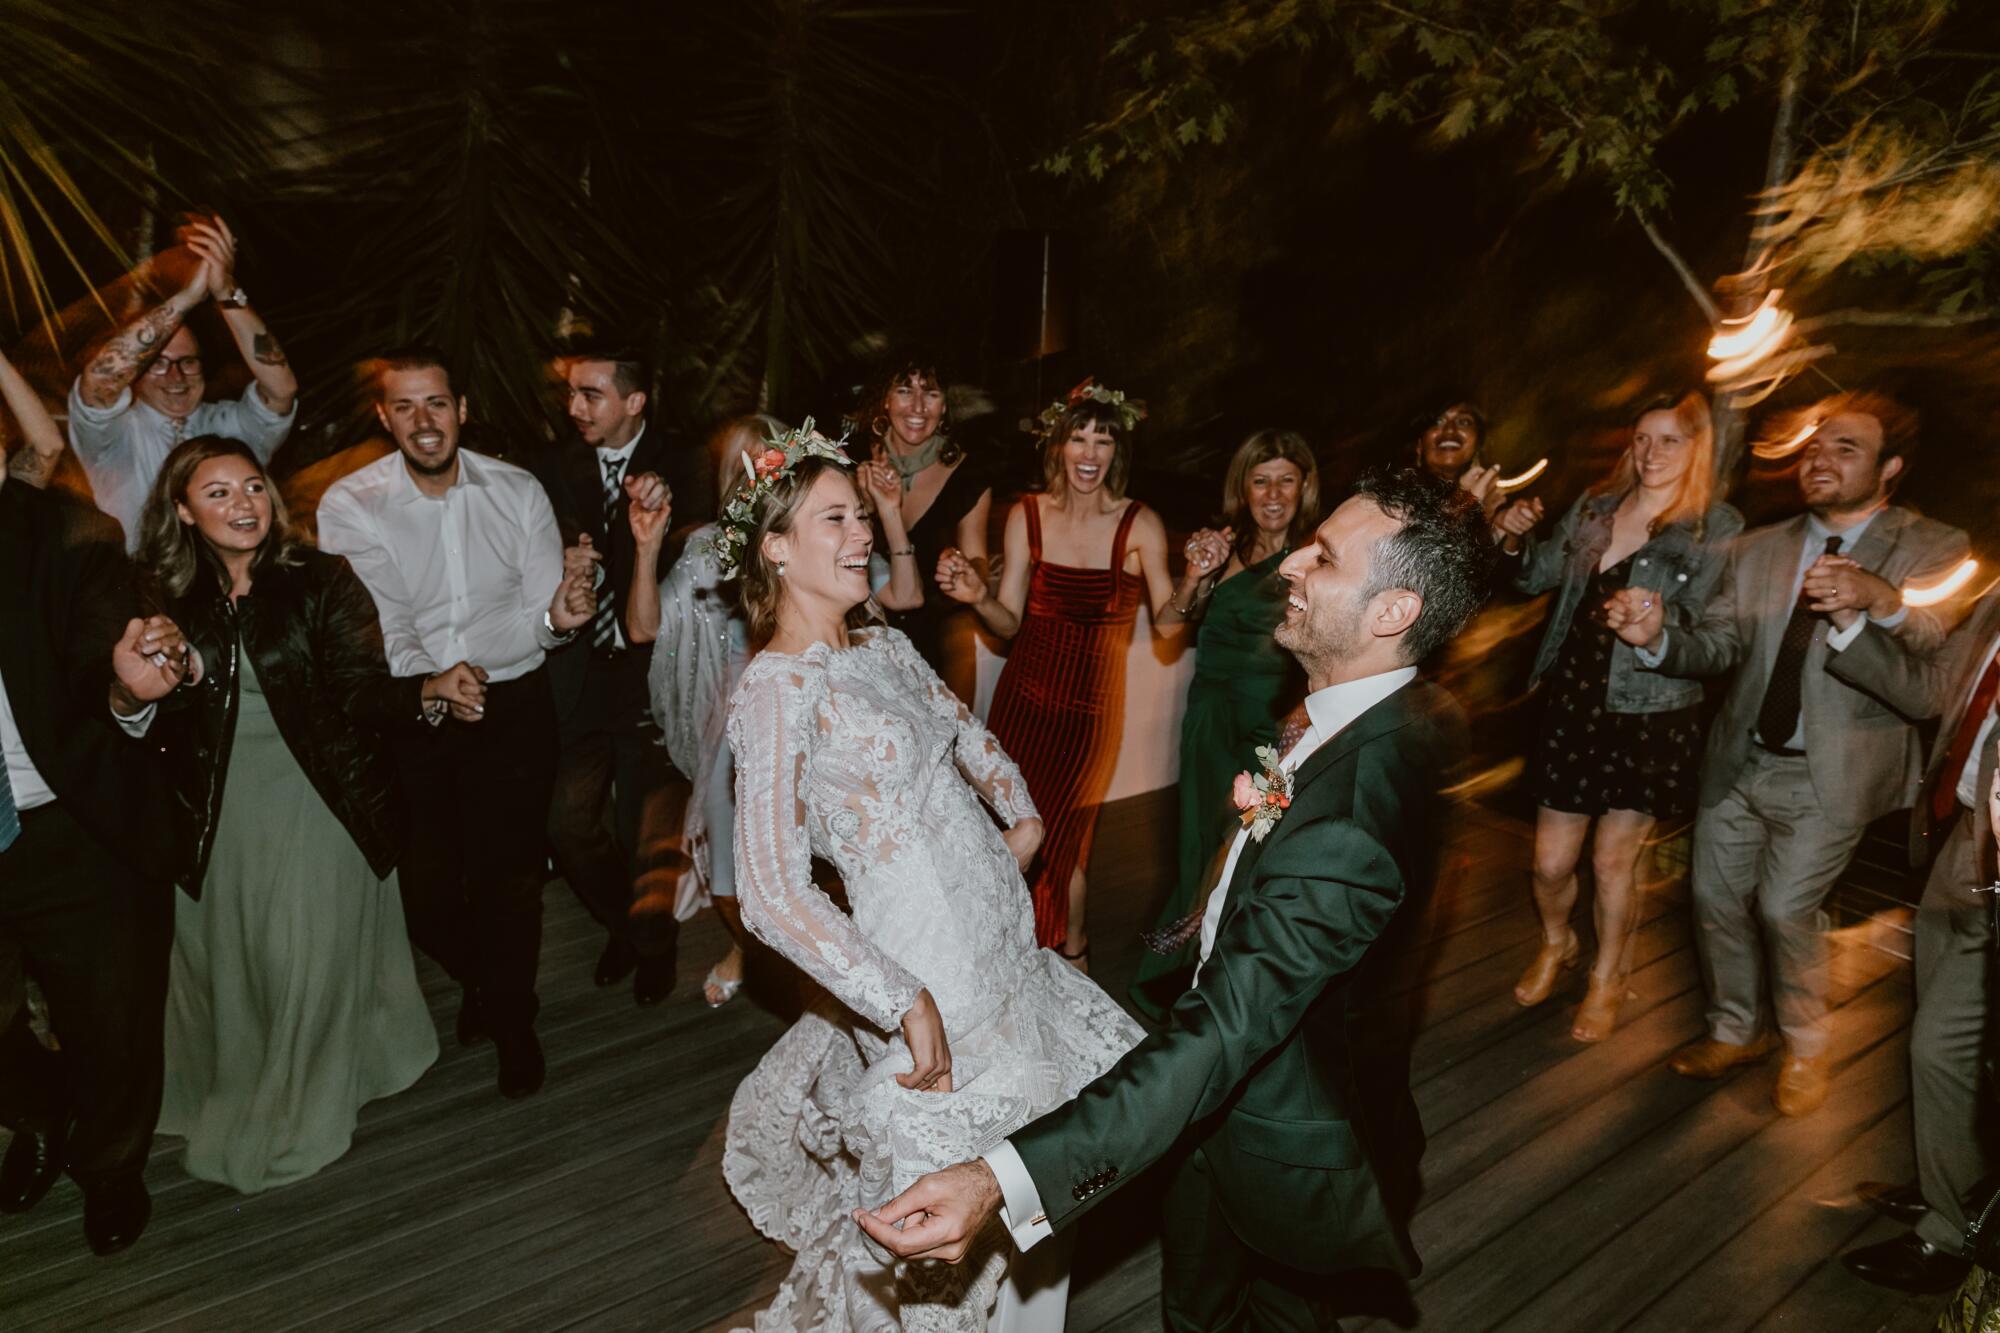 A couple dancing at their wedding as guests stand around watching them